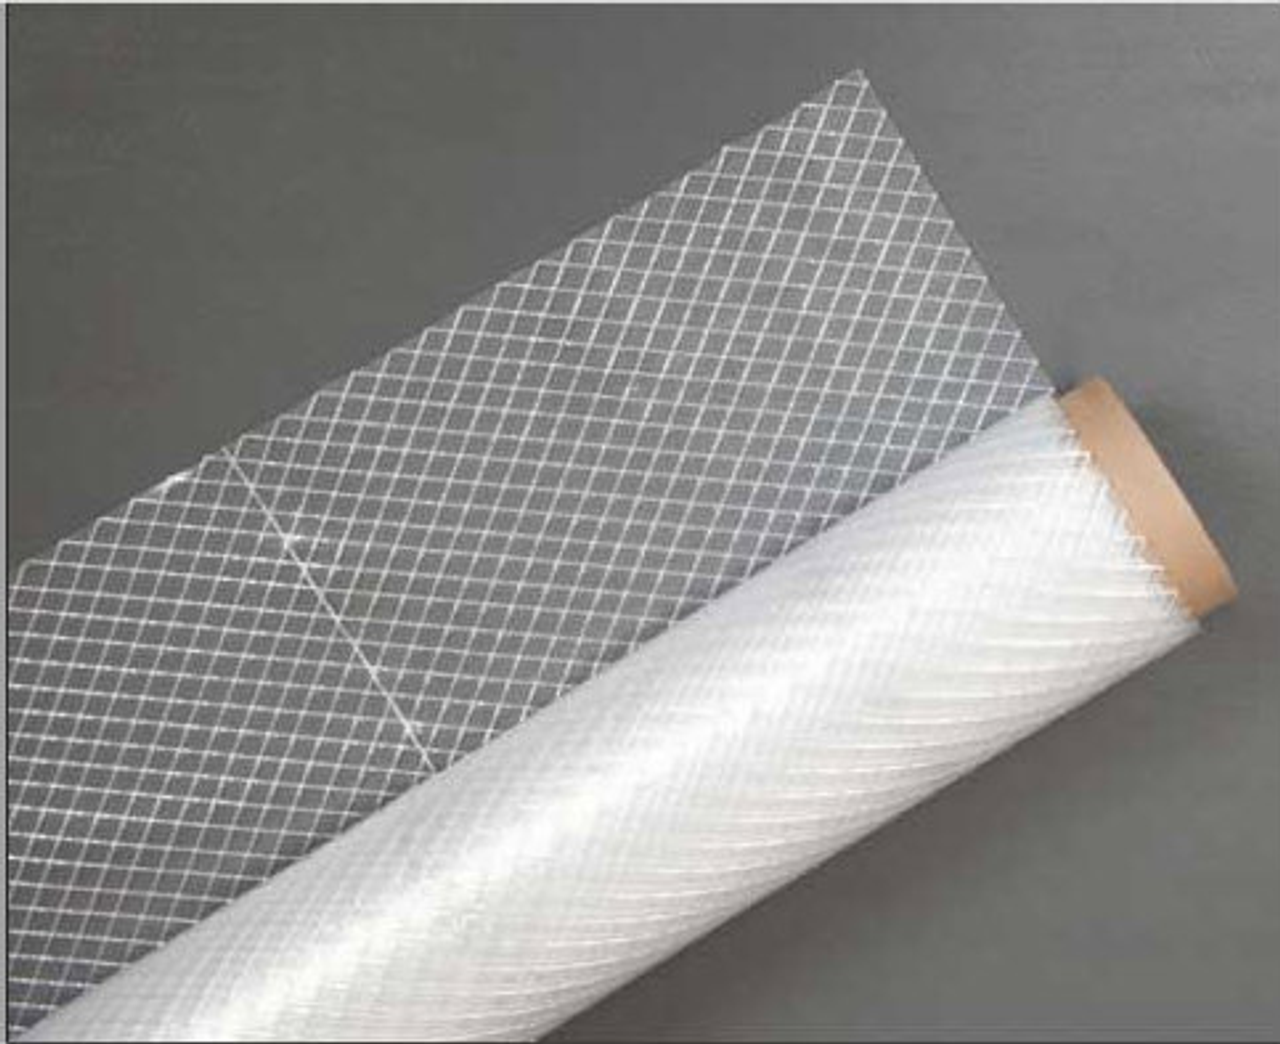  Poly Sheeting, 8' X 100' (800' Sq ft Roll), Clear, 6